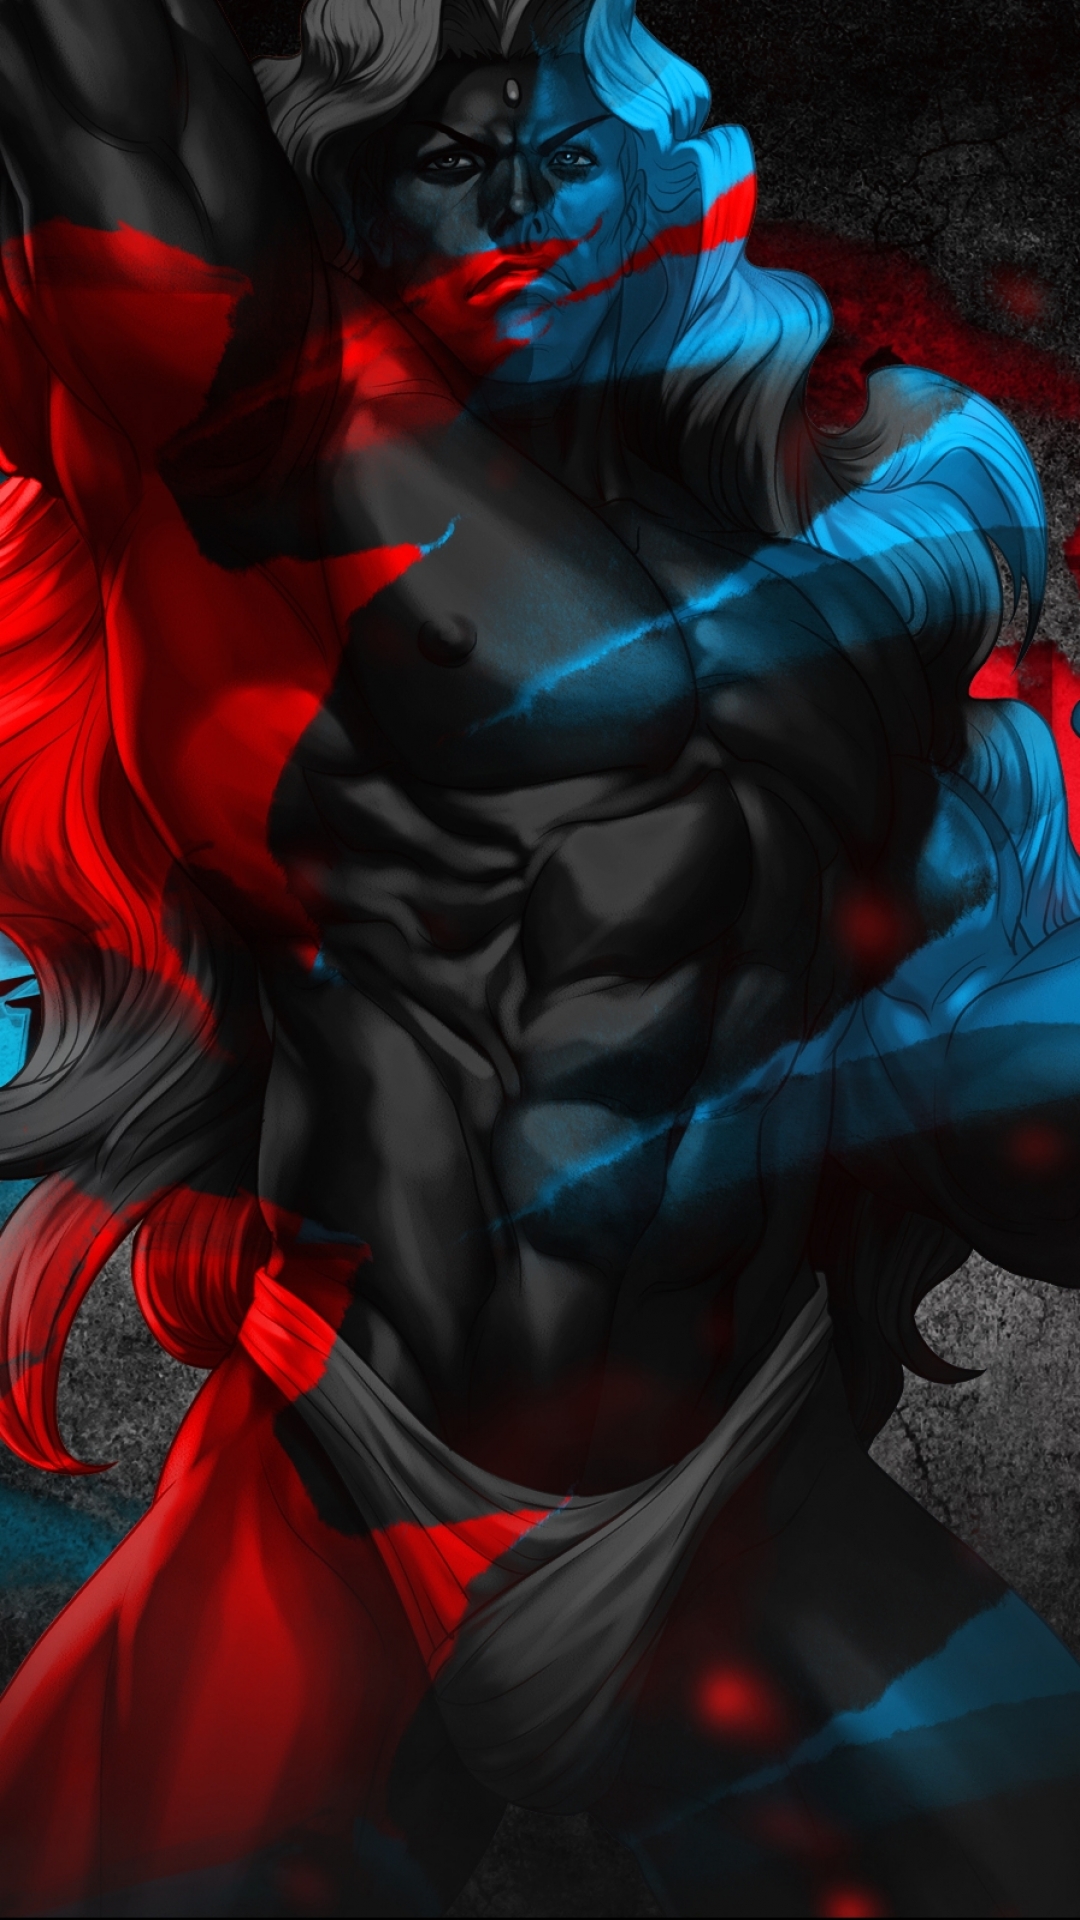 street fighter iphone wallpaper,blue,red,cg artwork,fictional character,graphic design